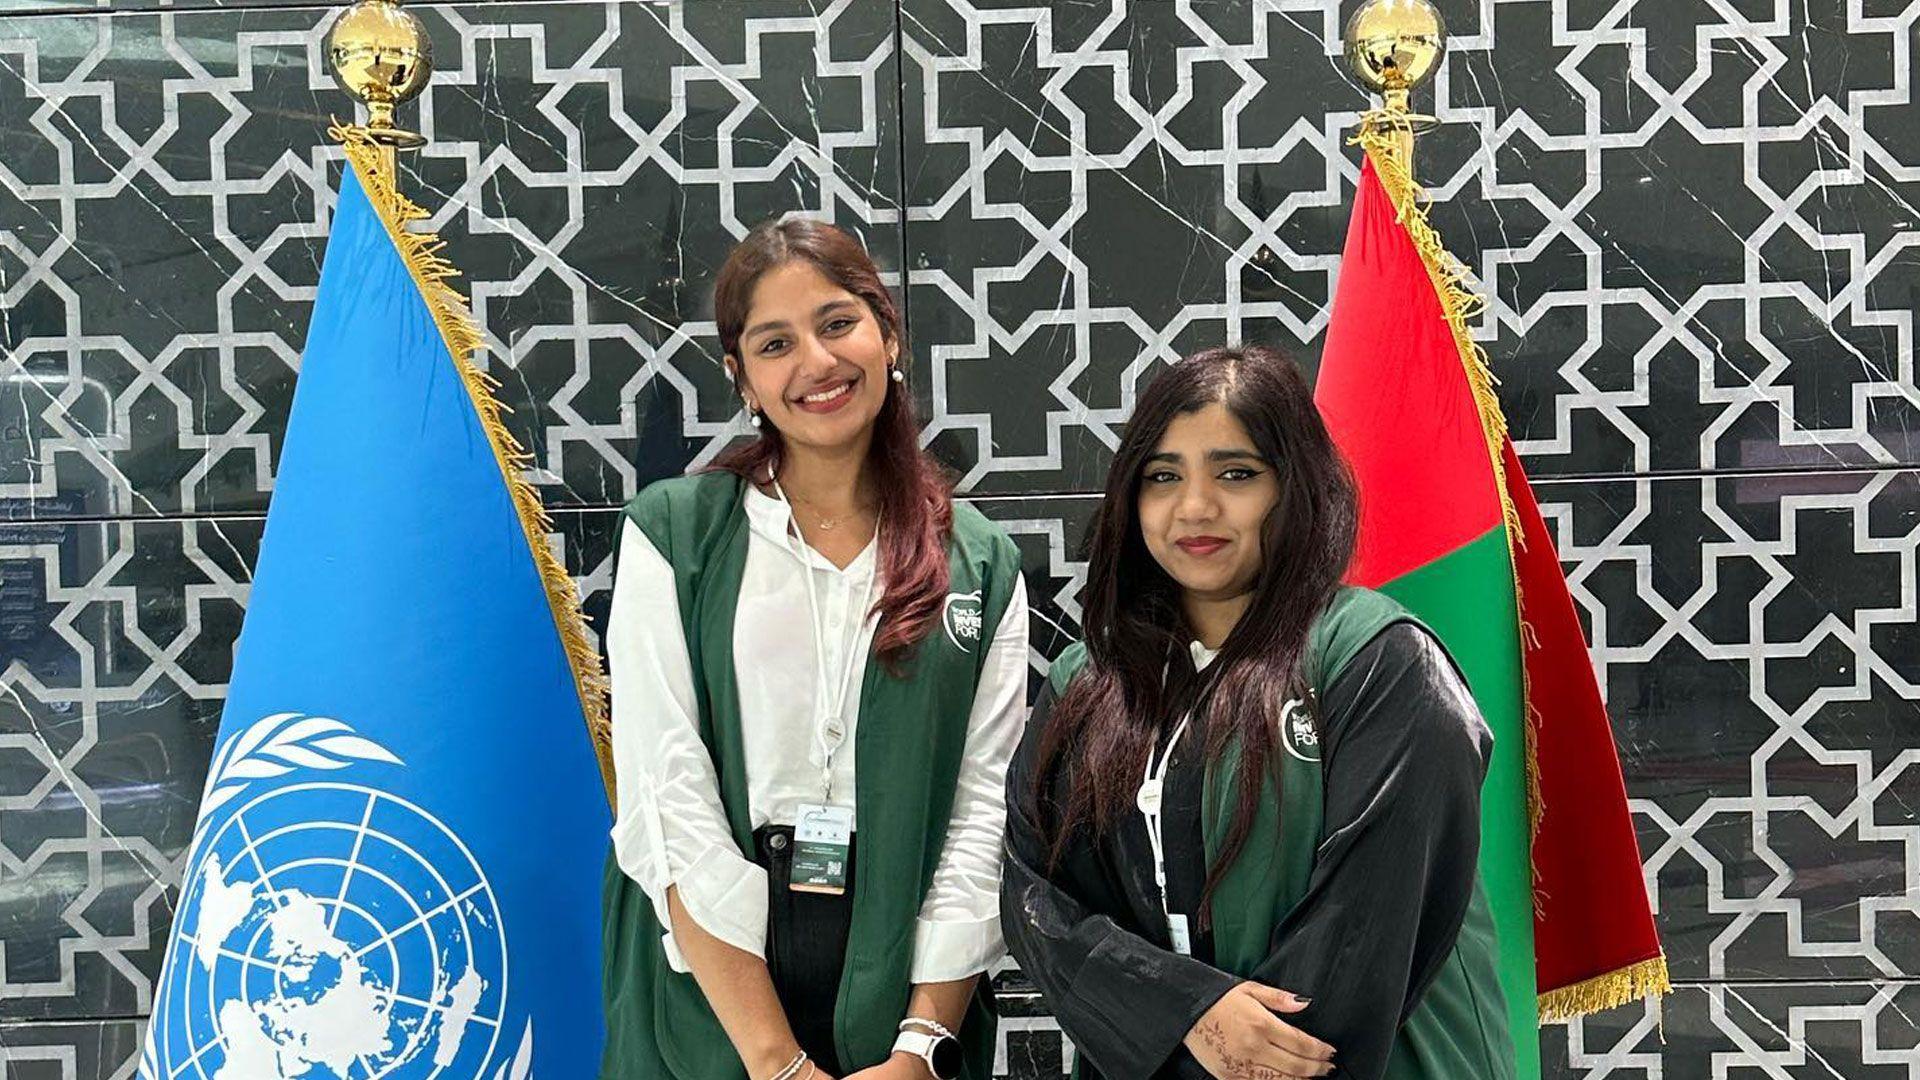 The United Nations Conference on Trade and Development (UNCTAD) World Investment Forum 2023, one of most prestigious UN events, took place in Abu Dhabi, UAE from 16 to 20 October 2023, and Middlesex University Dubai was honoured to be part of the occasion as an official Local Academic Partner.  